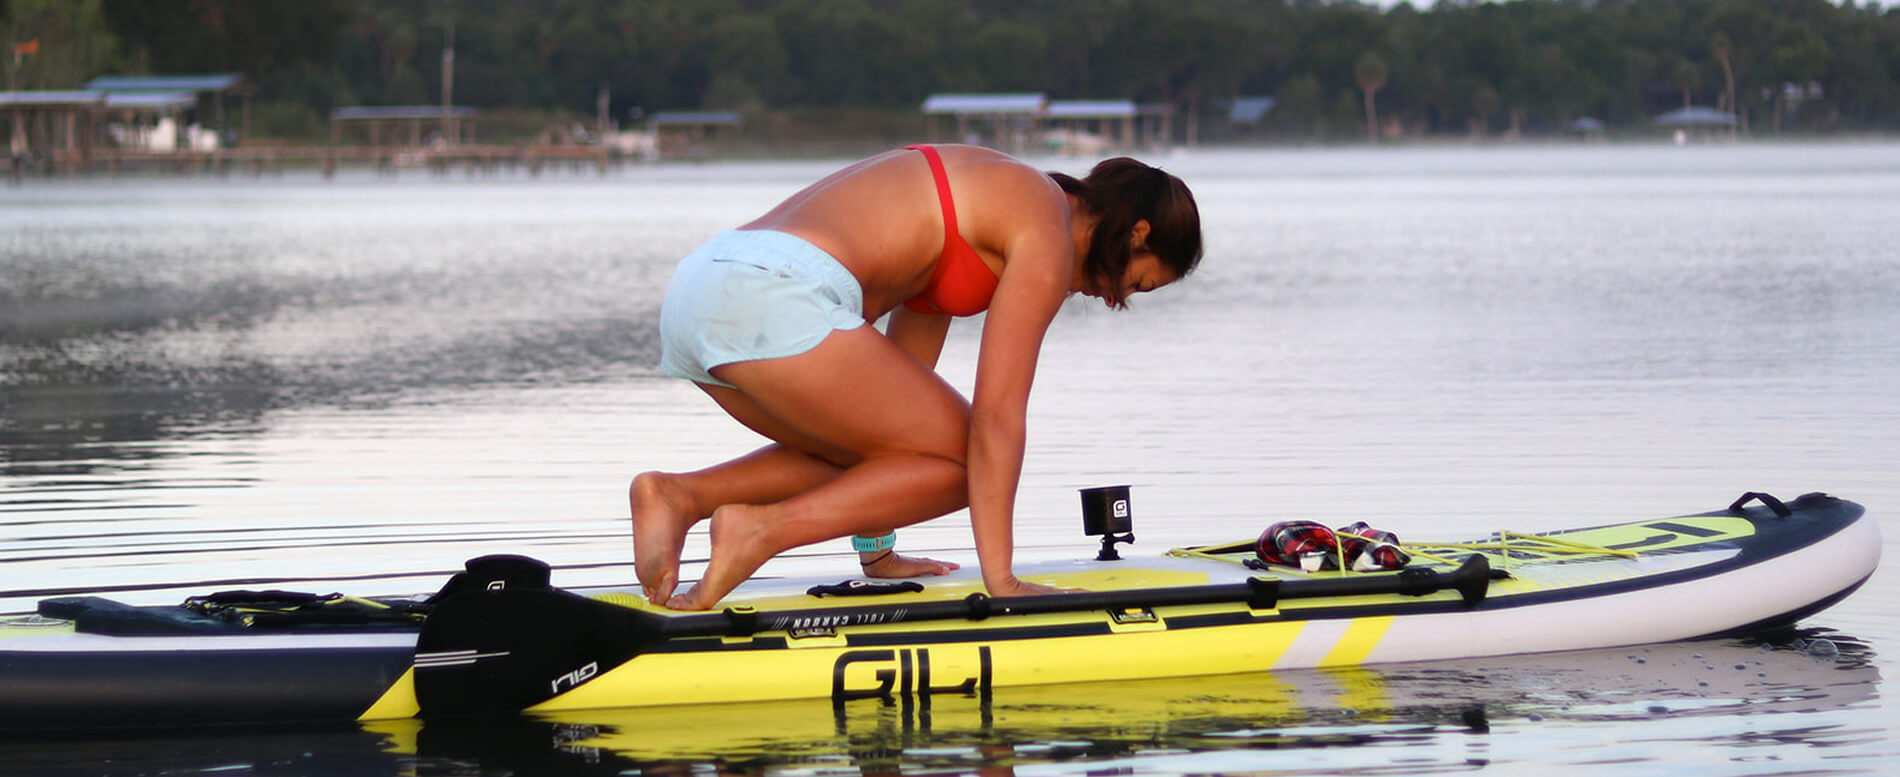 Women performing a Yoga on her yellow GILI inflatable paddle board